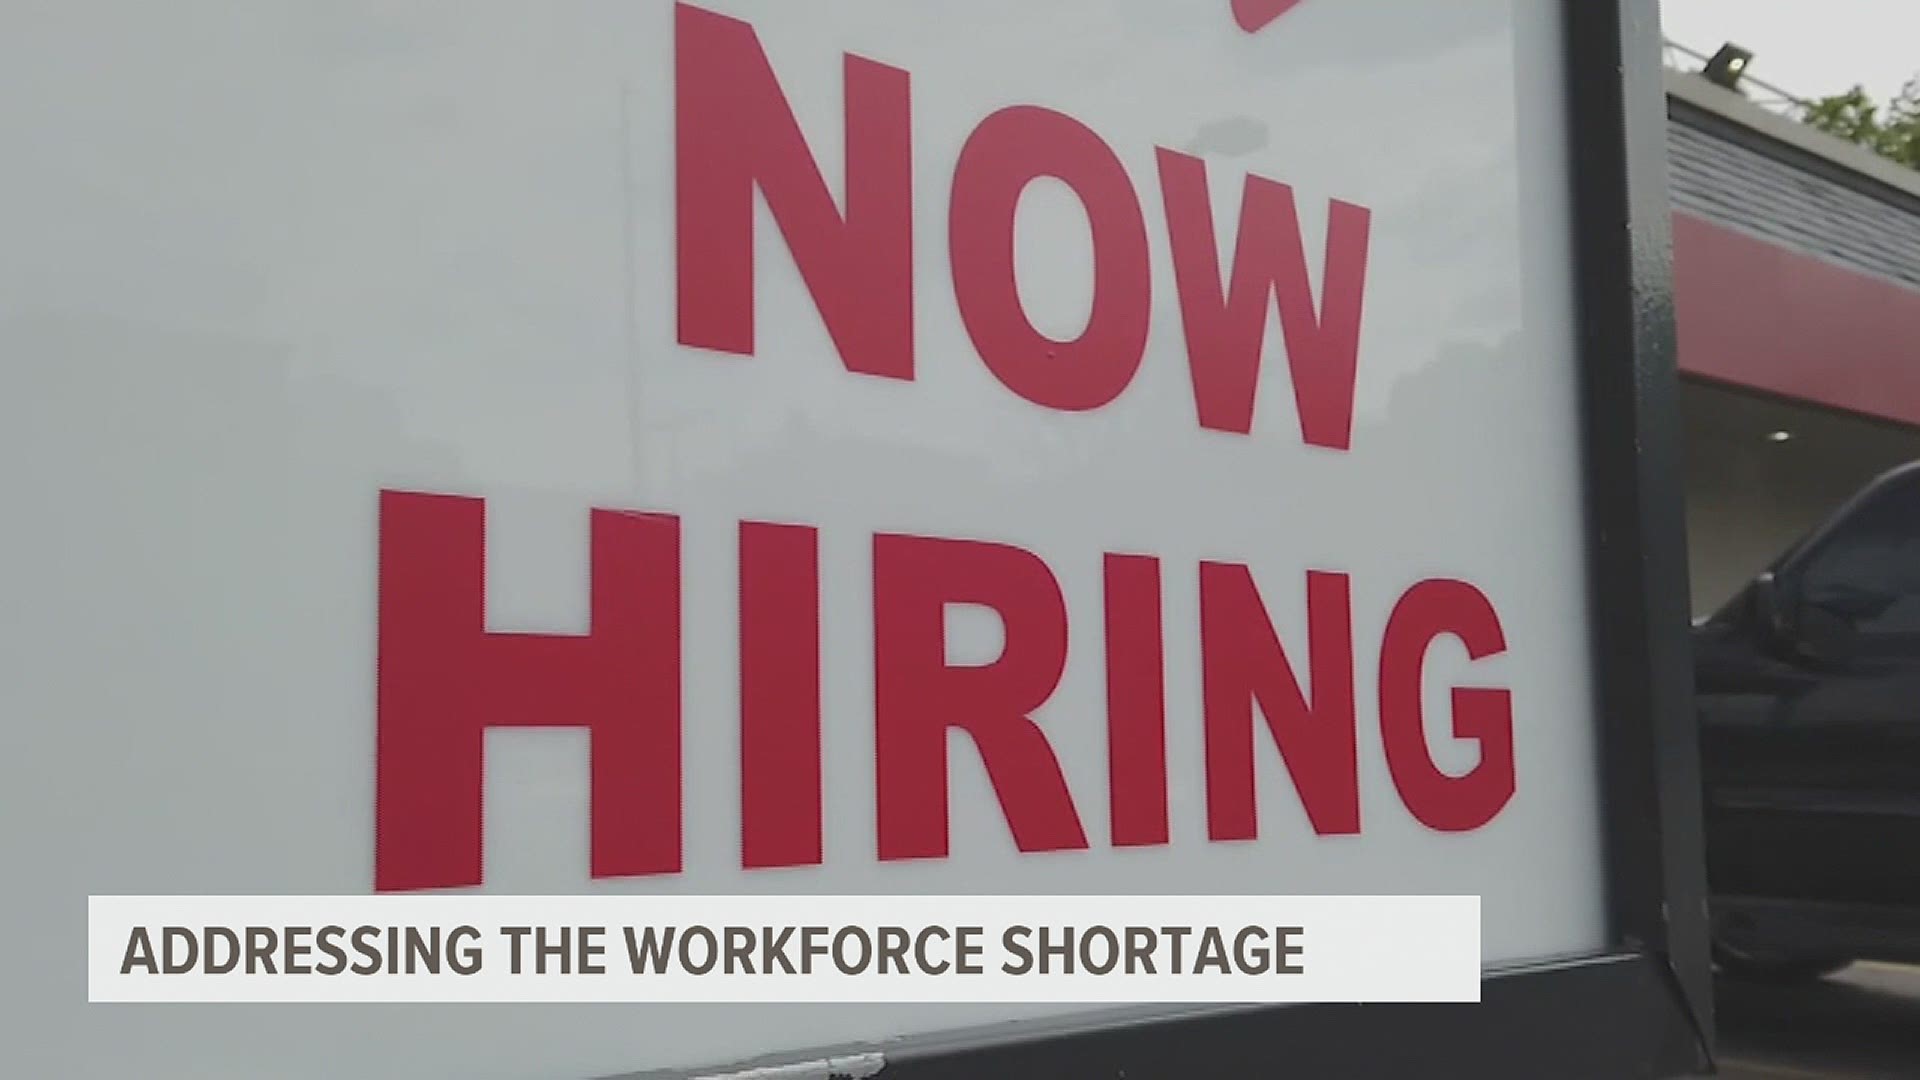 Business say they are struggling to hire workers to fill open positions.